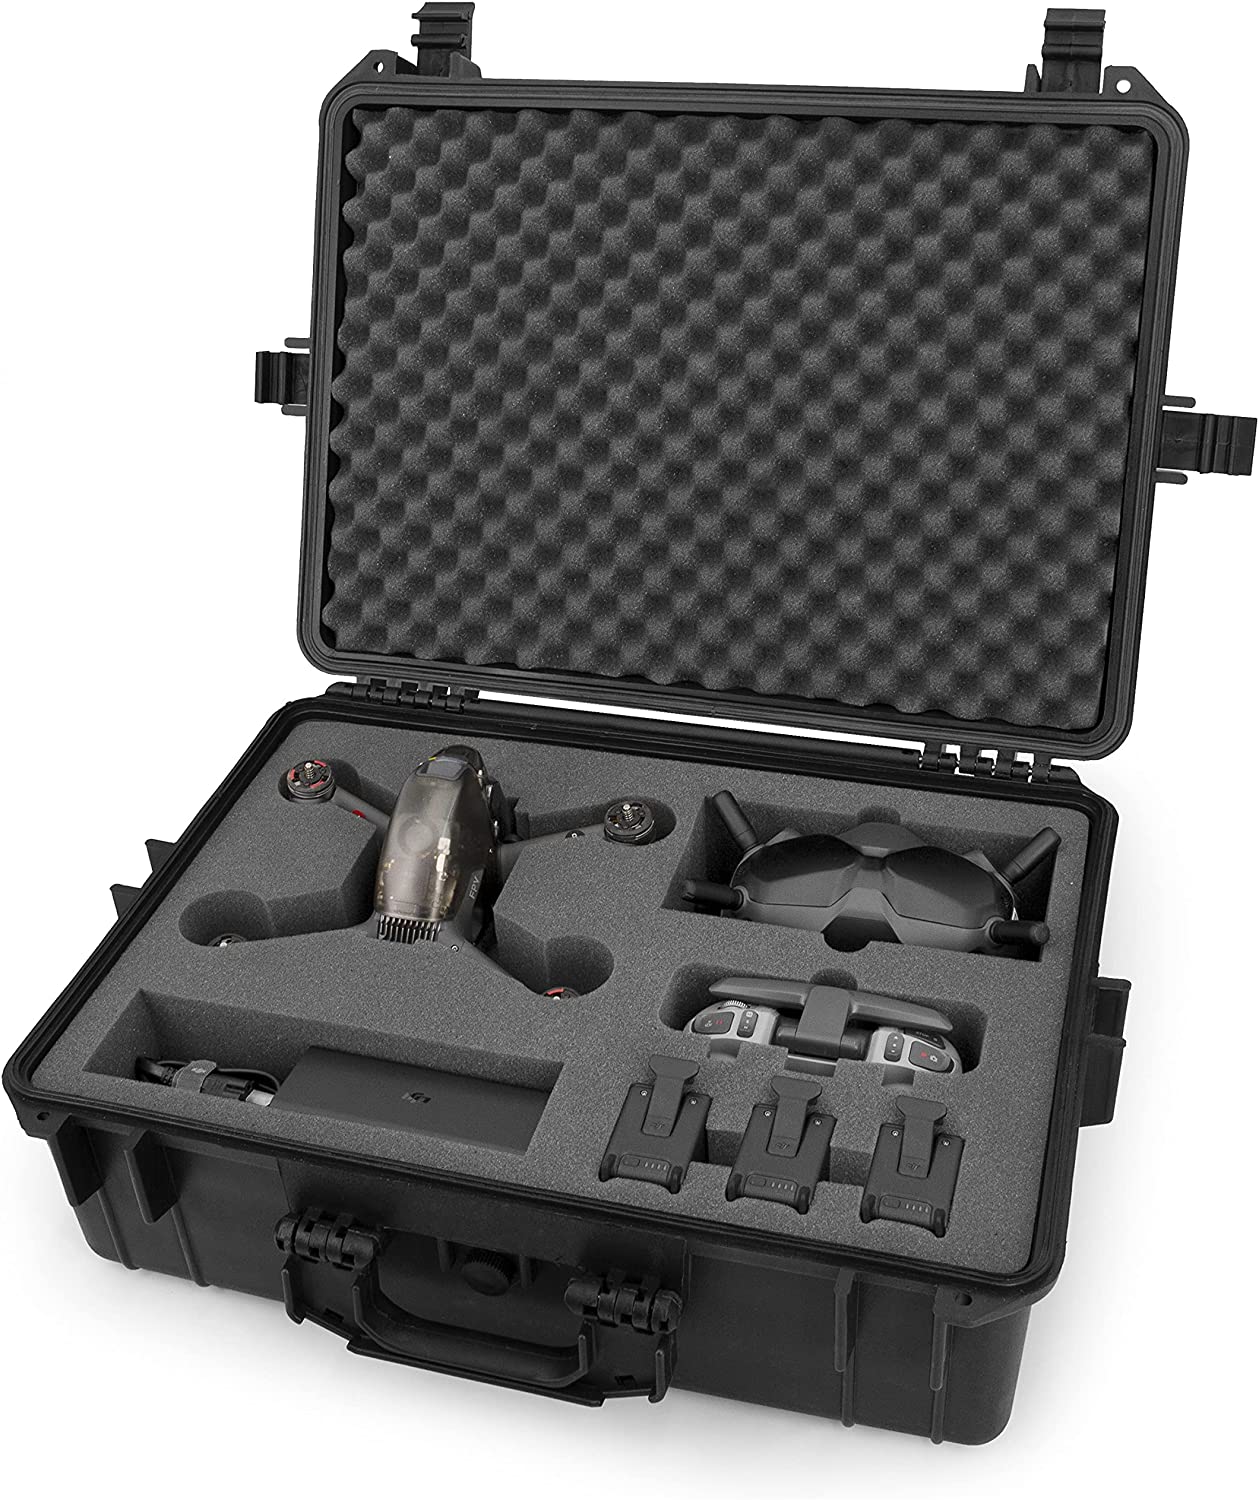 CASEMATIX Hard Carrying Case Compatible with DJI FPV Combo Drone